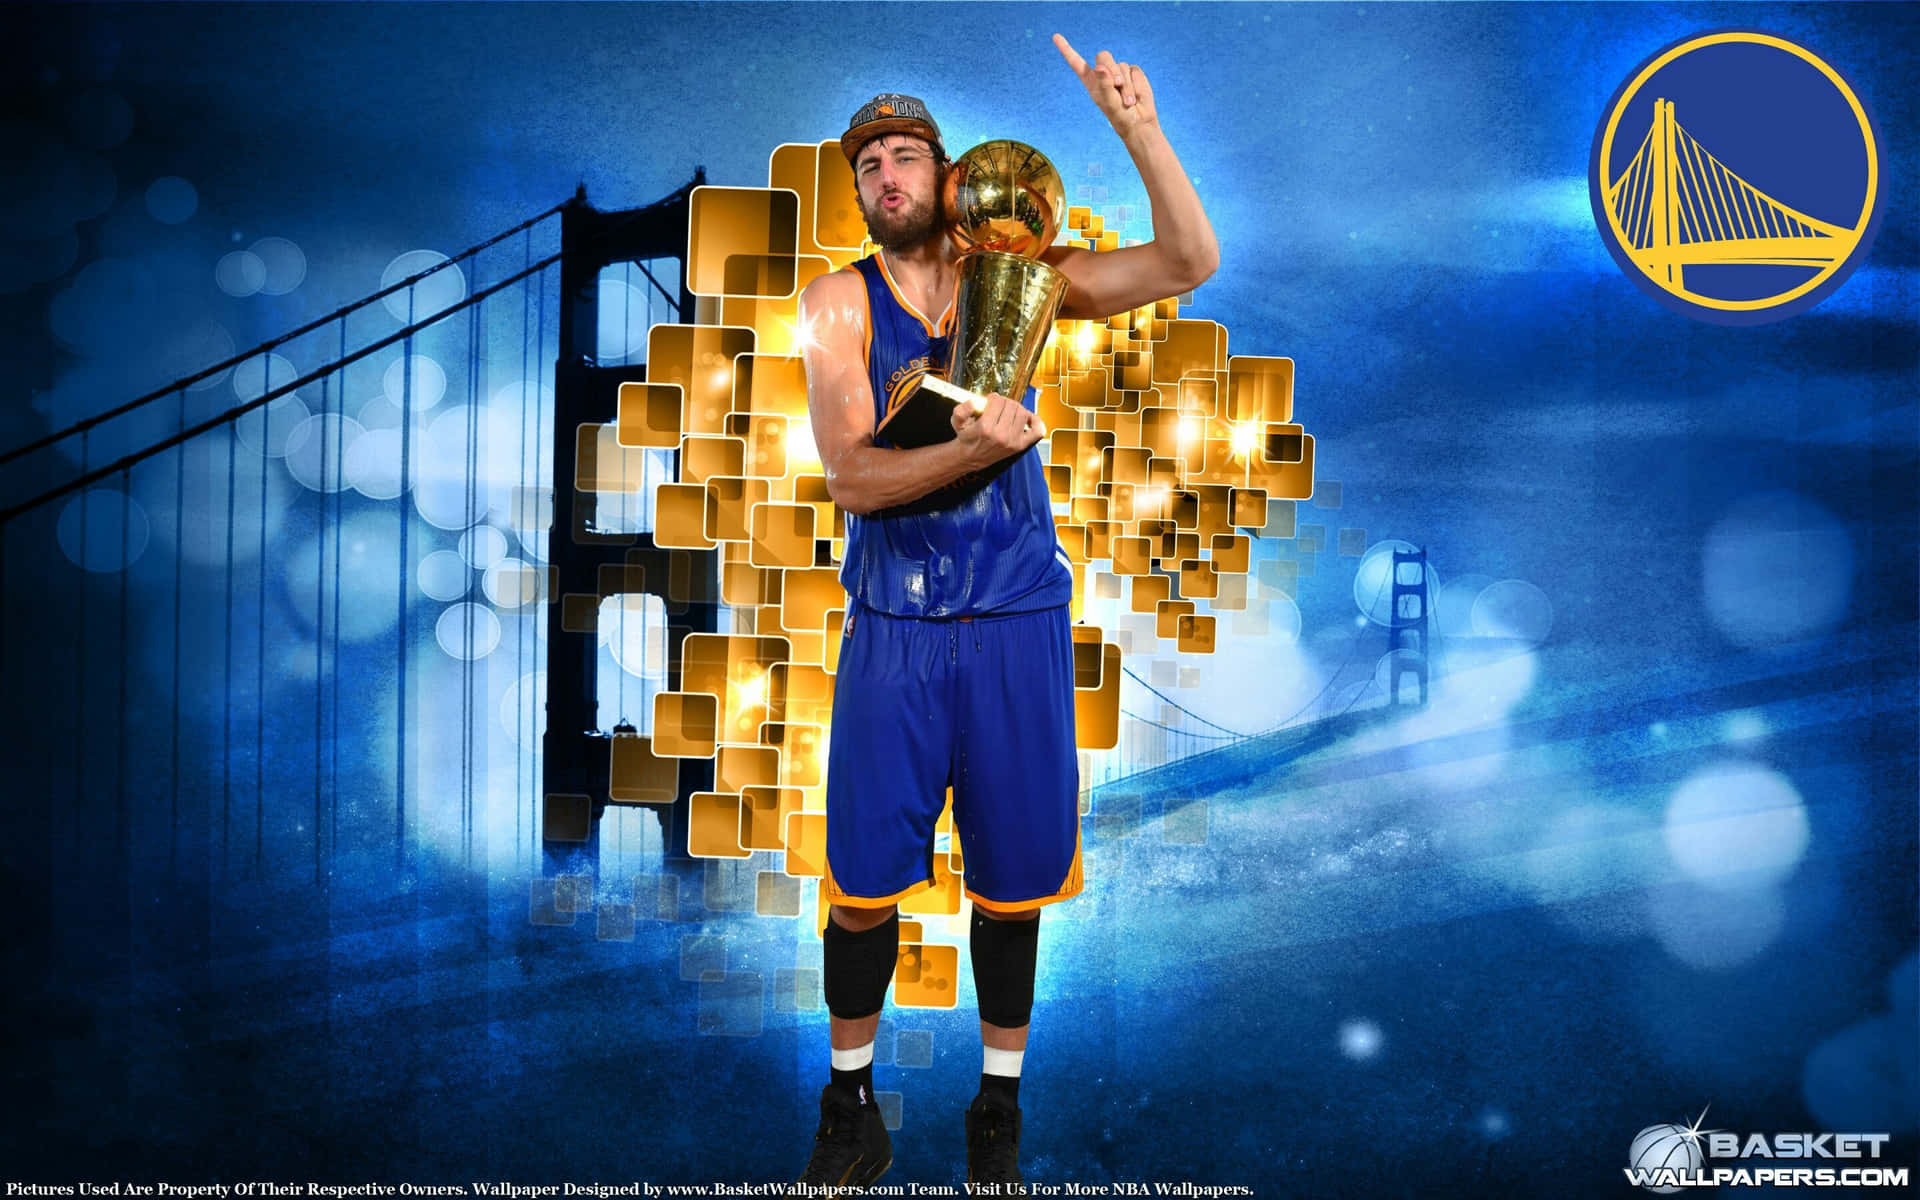 Nba Superstars - How Far Will You Go? Background